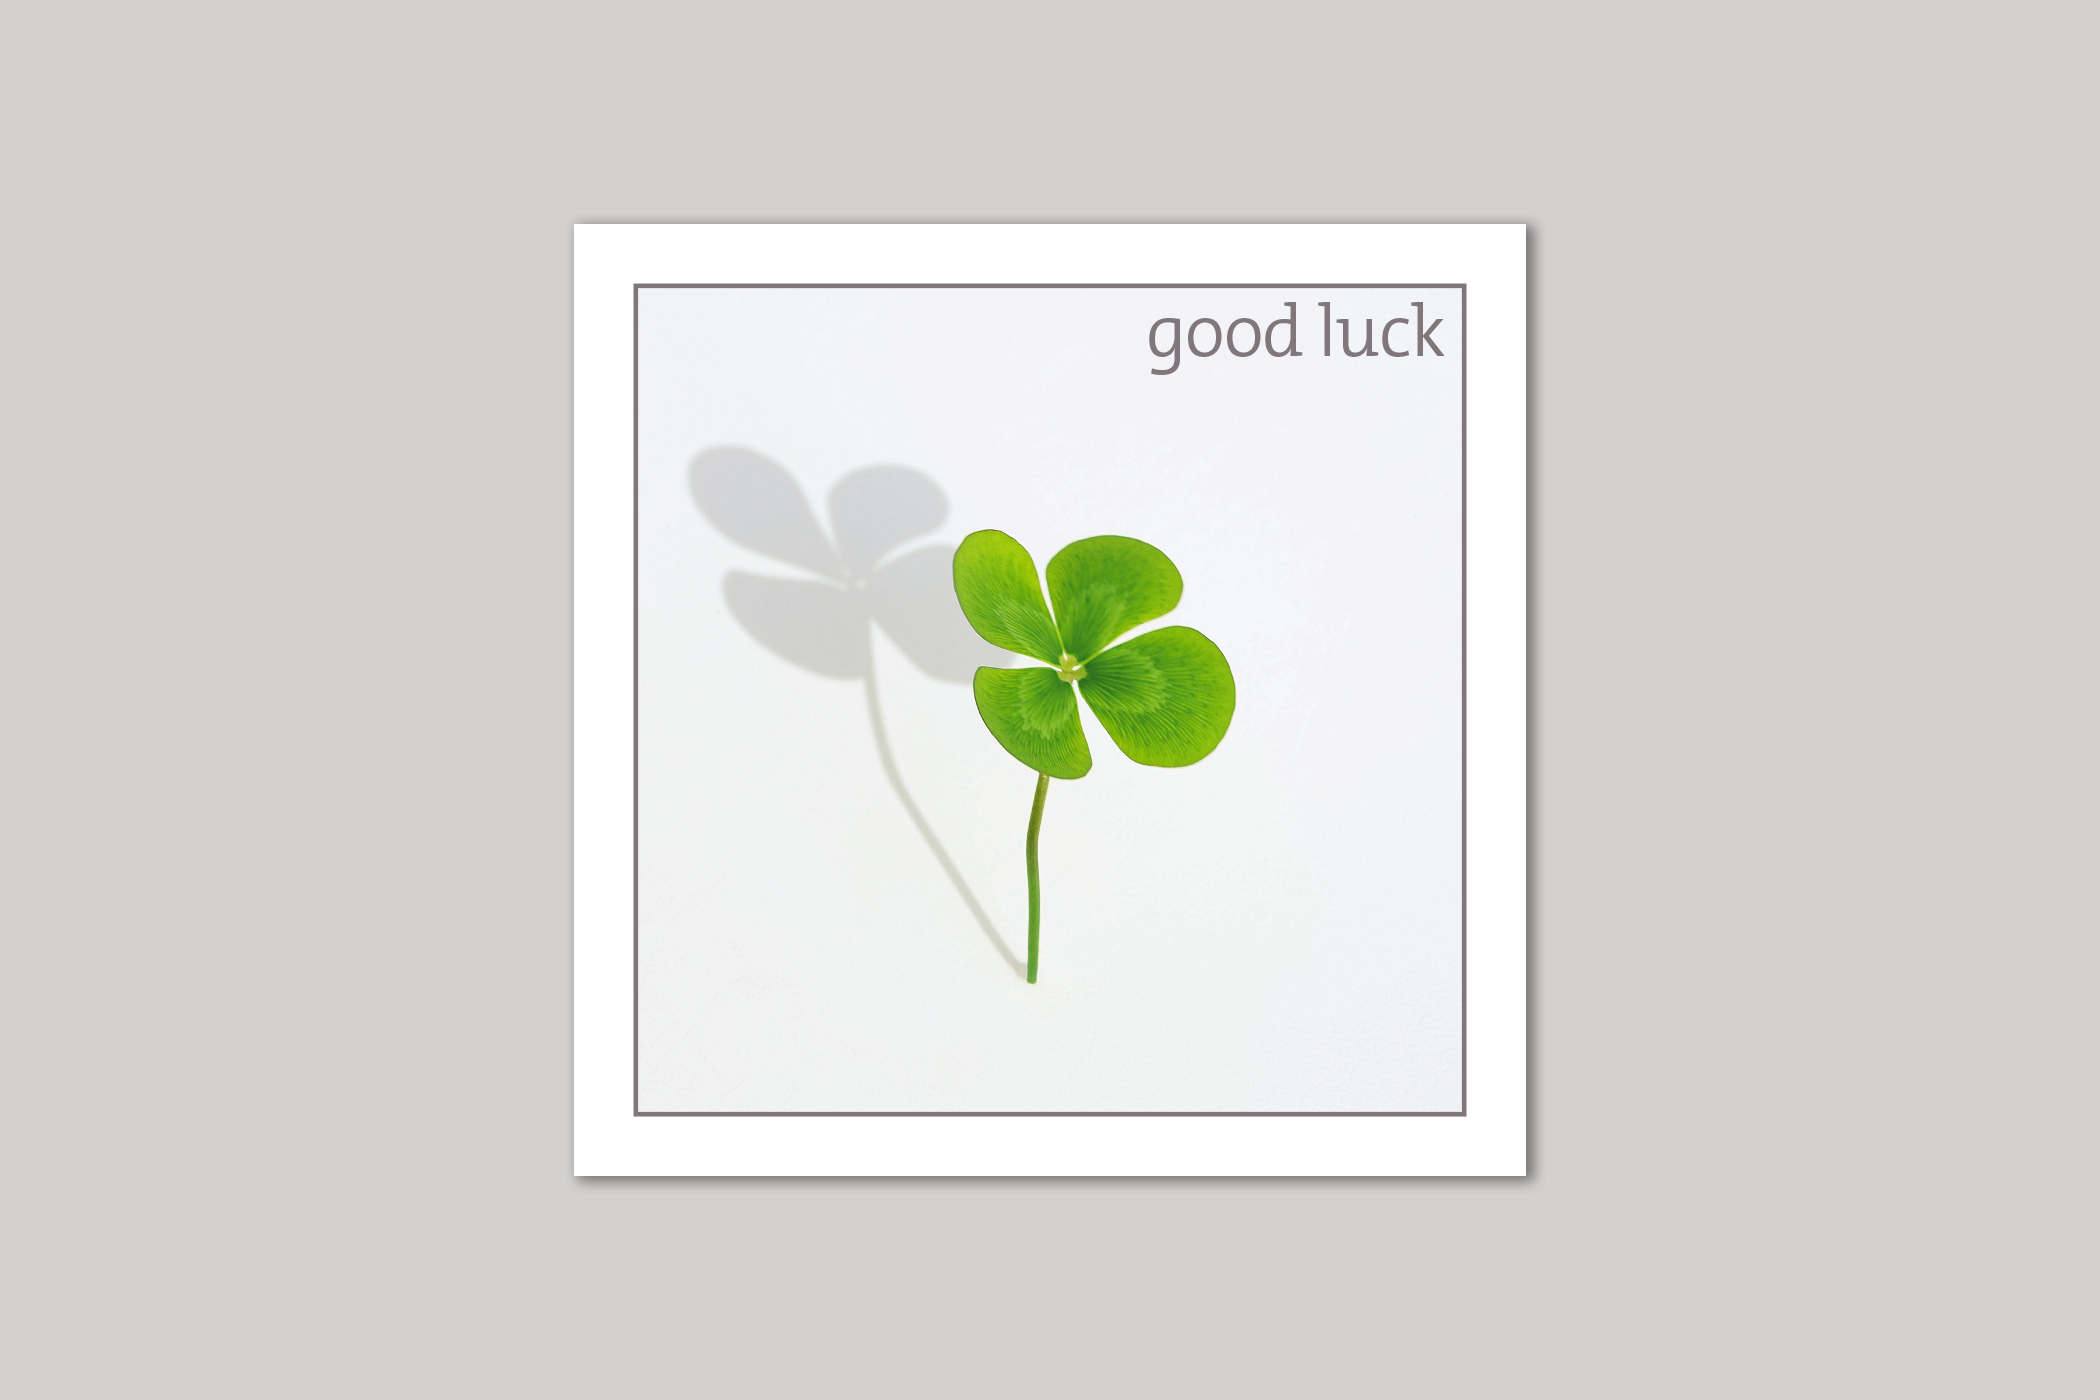 Clover good luck card from Exposure Silver Edition range of greeting cards by Icon.